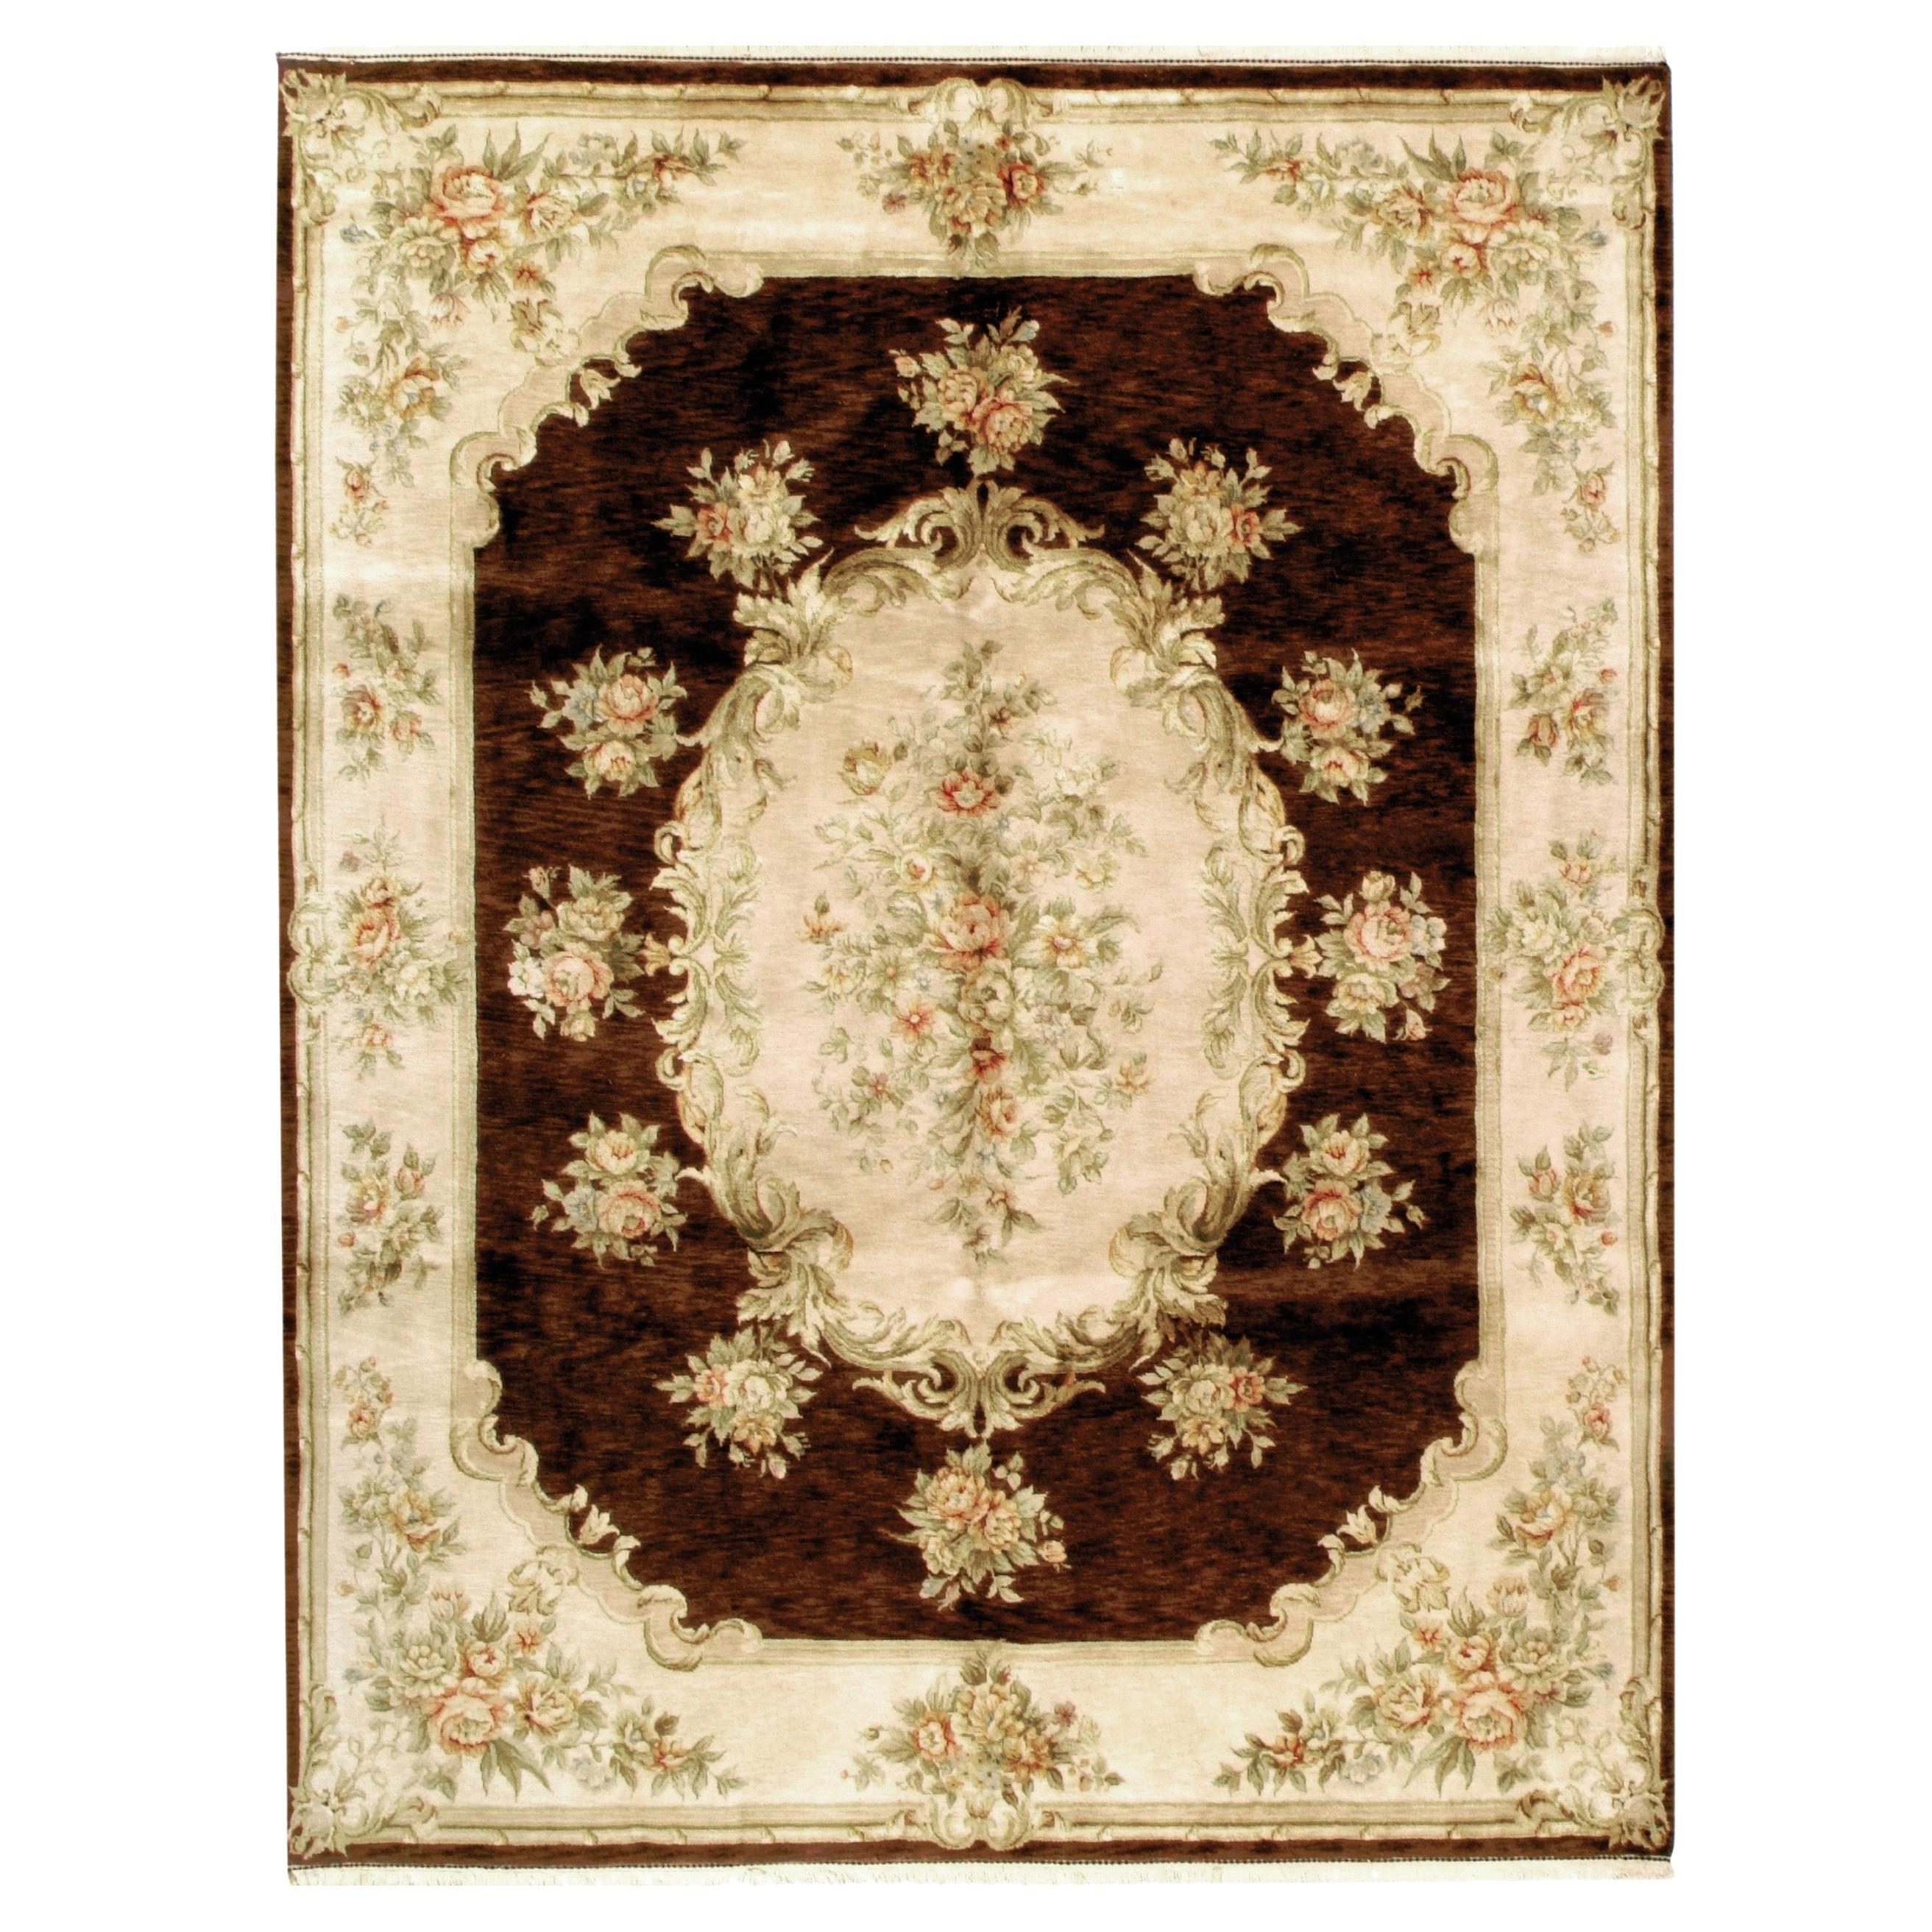 Luxury Traditional Hand-Knotted European Belvoir Brown/Cream 10x14 Rug